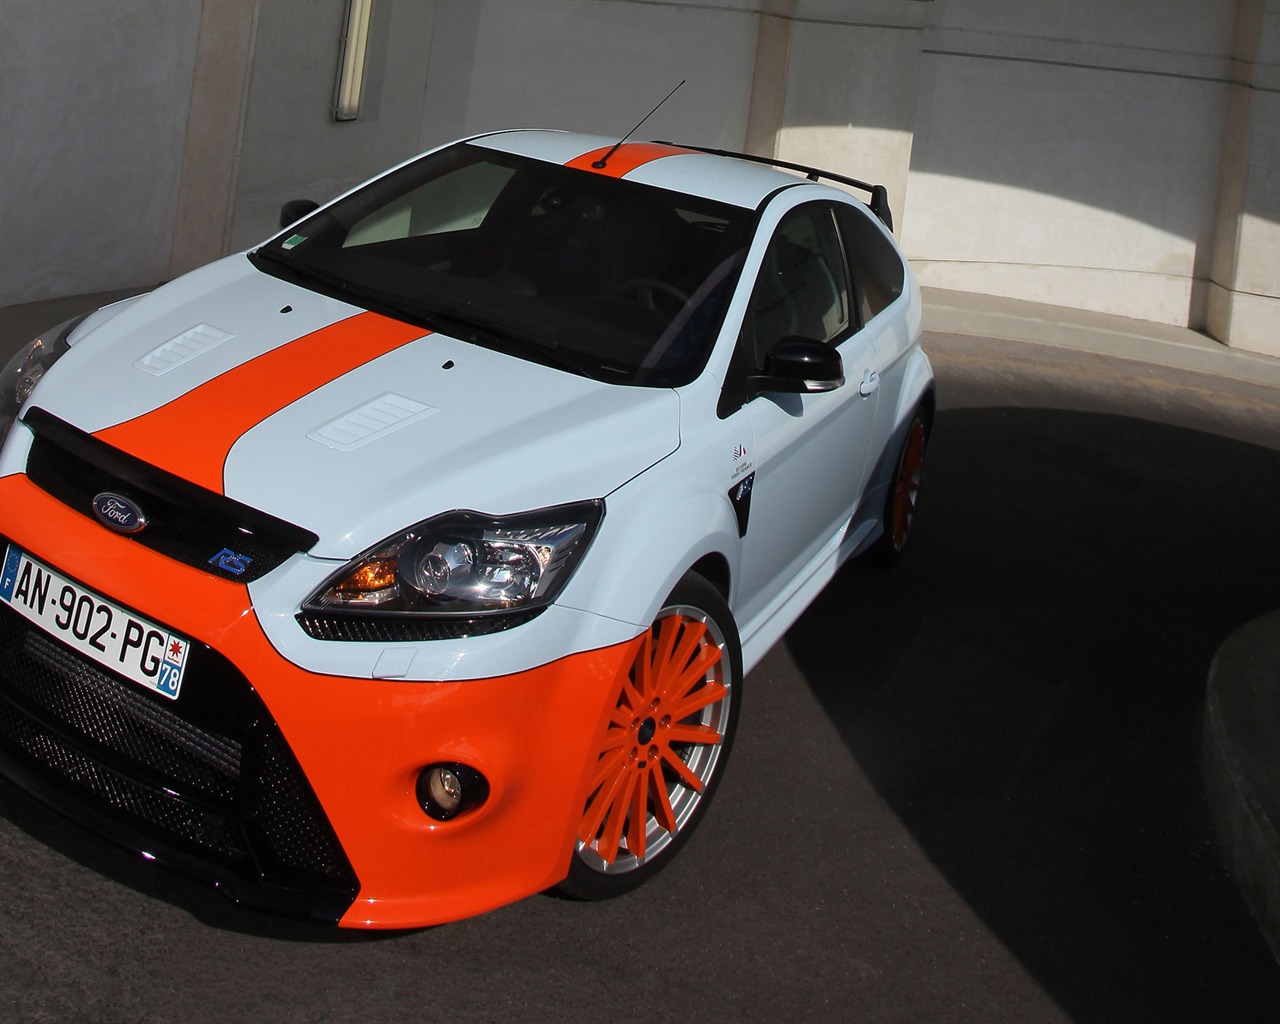 Ford Focus RS Le Mans Classic - 2010 福特6 - 1280x1024